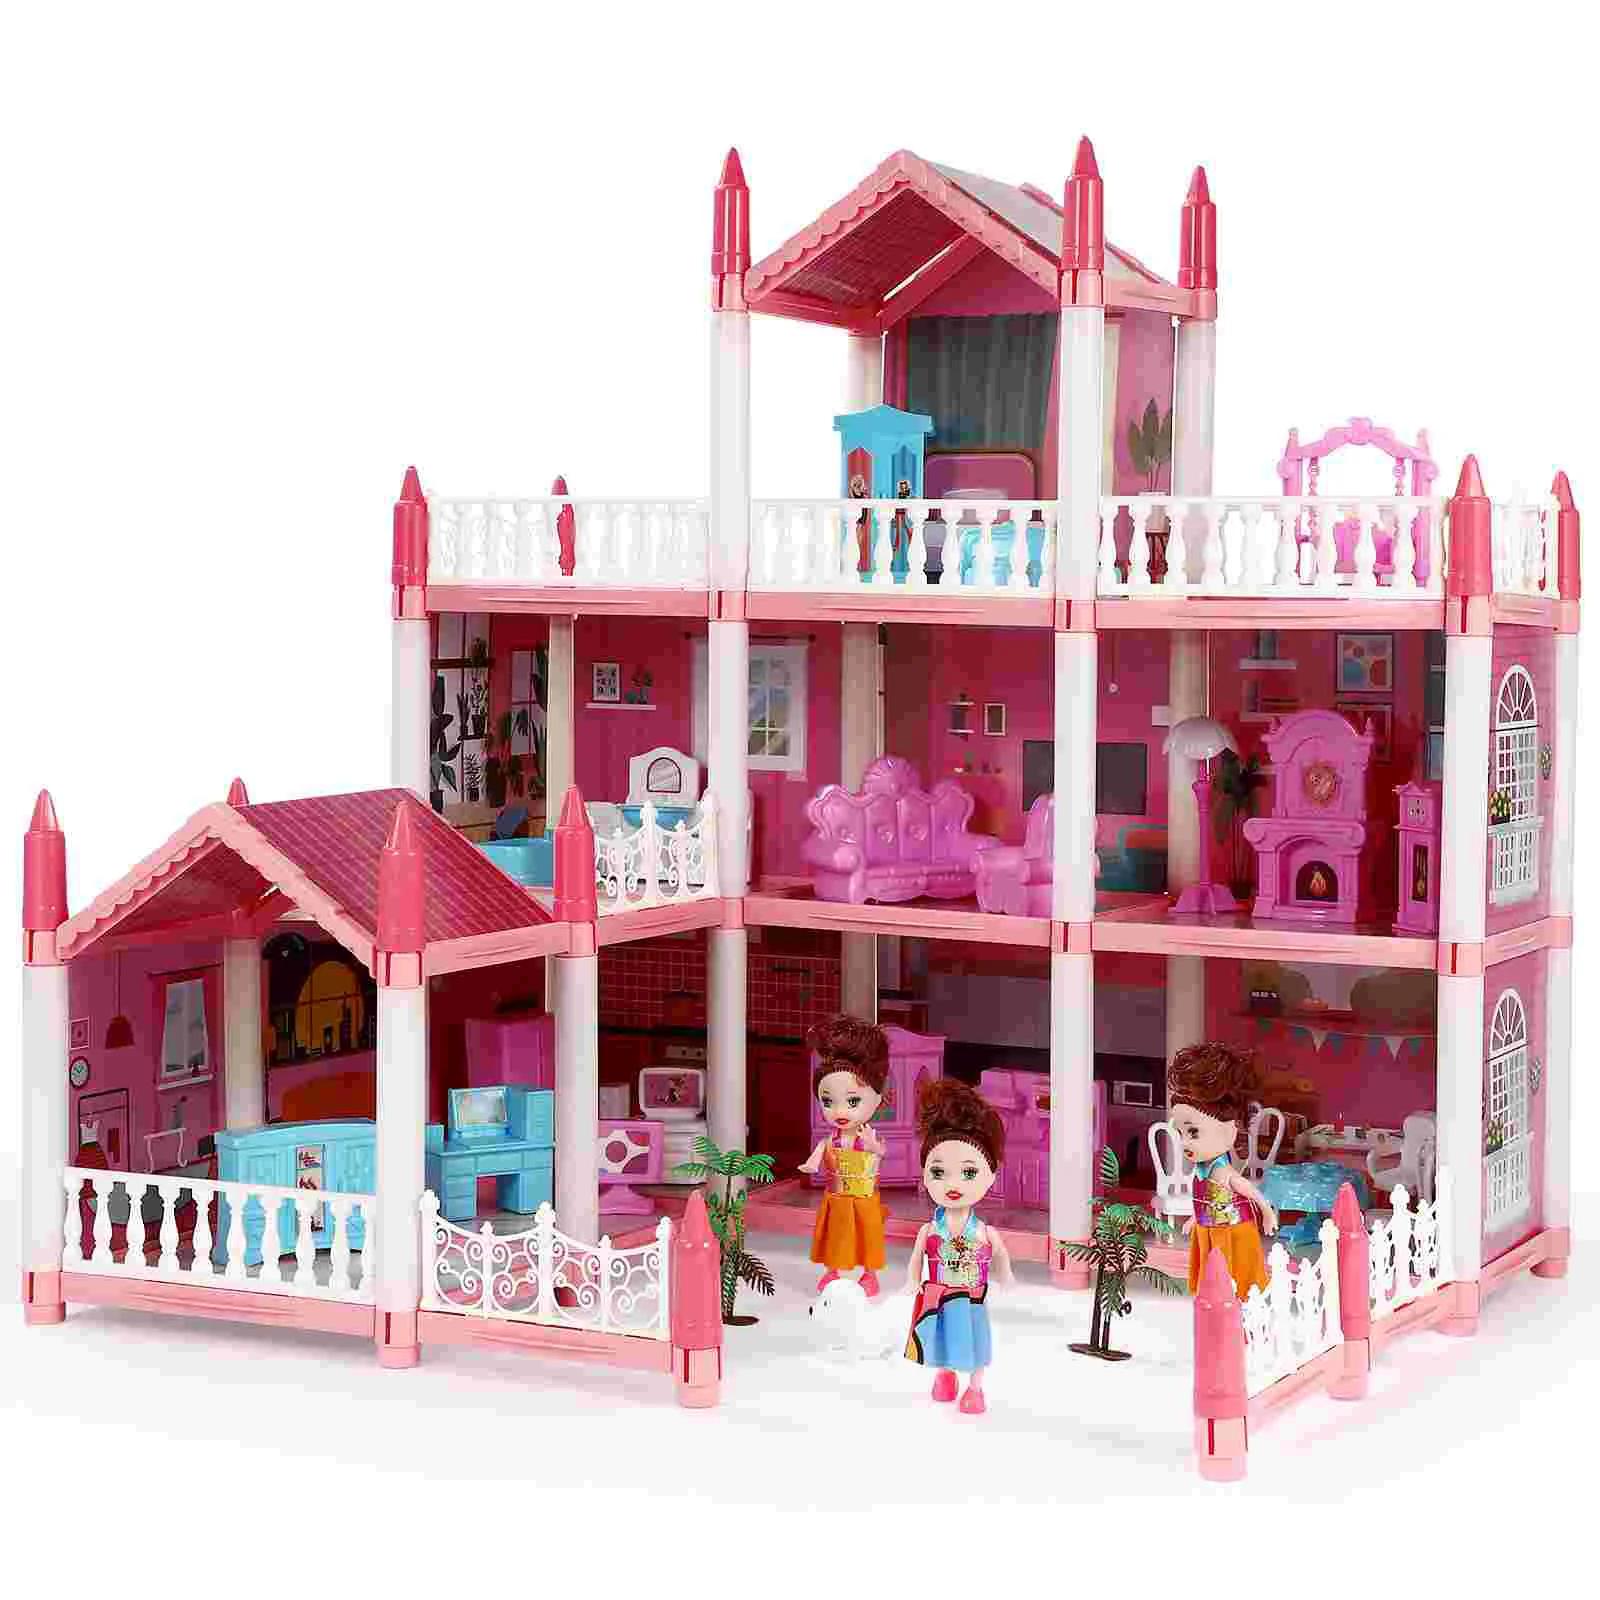 Girl Children's Play House Toy Girl's Imitation 9 Rooms Pink Princess Toys Pp With 3 Stories lovecraft s untold stories ost artbook pc